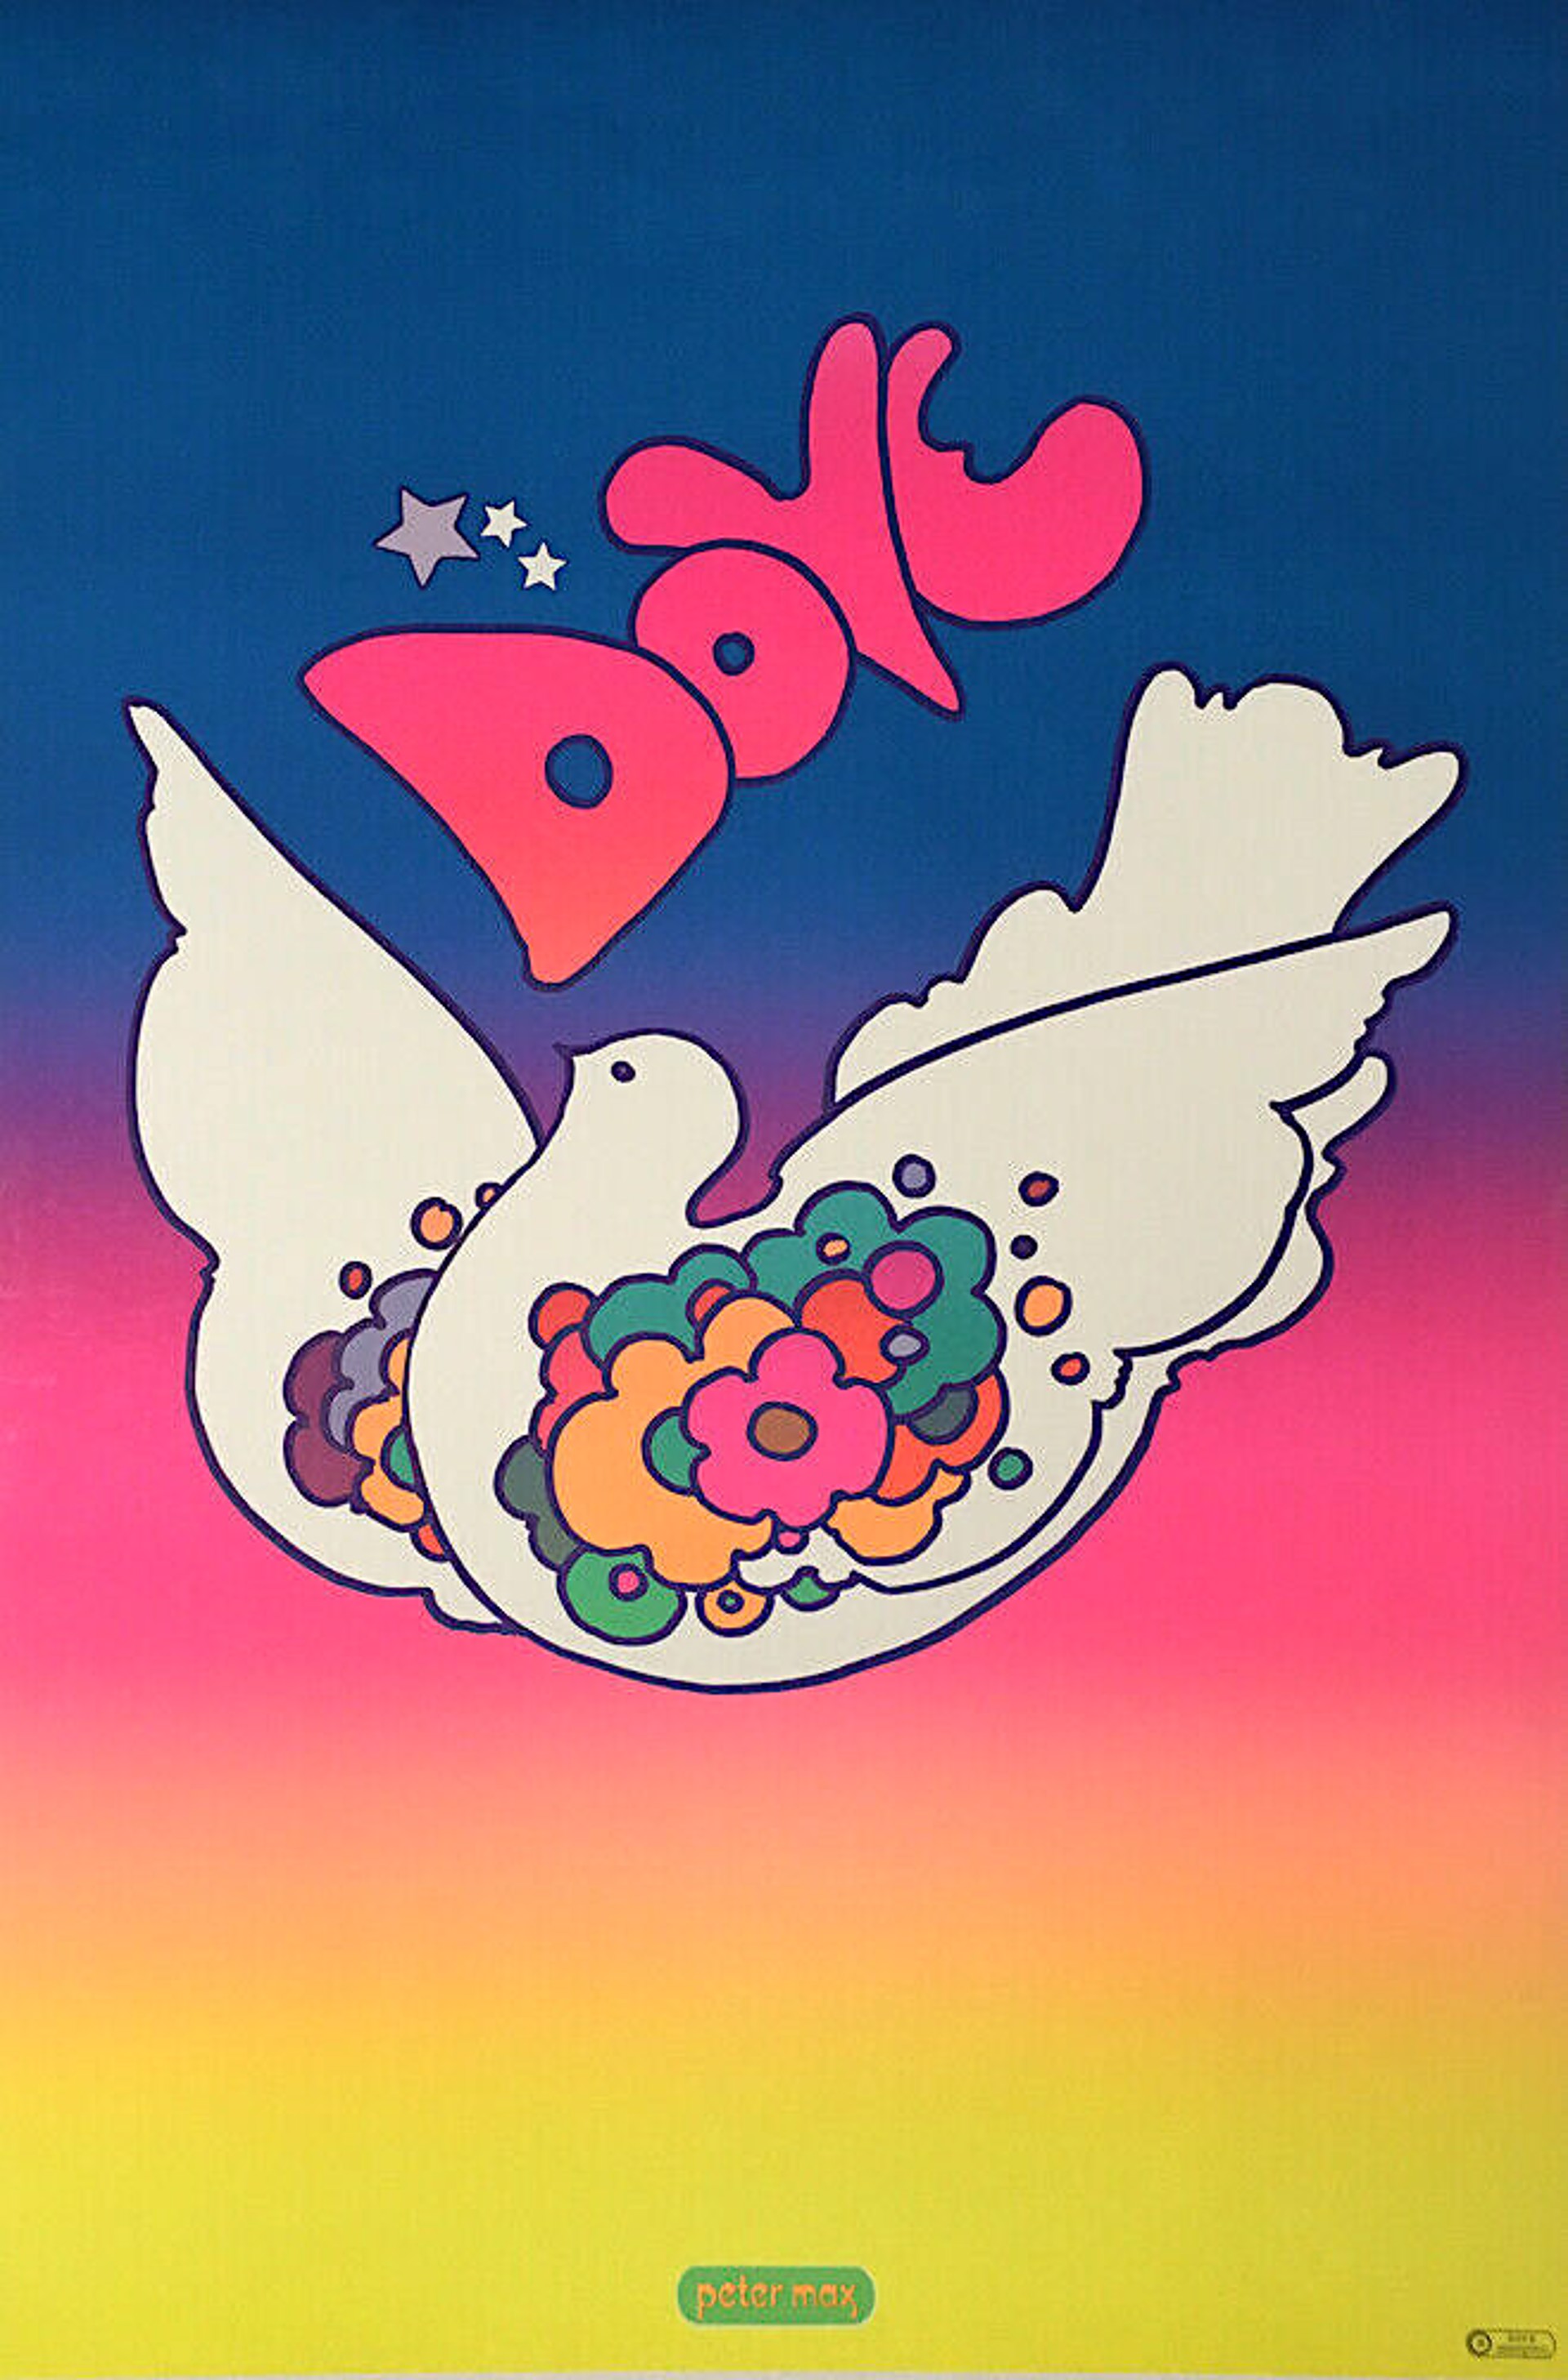 Dove by Peter Max